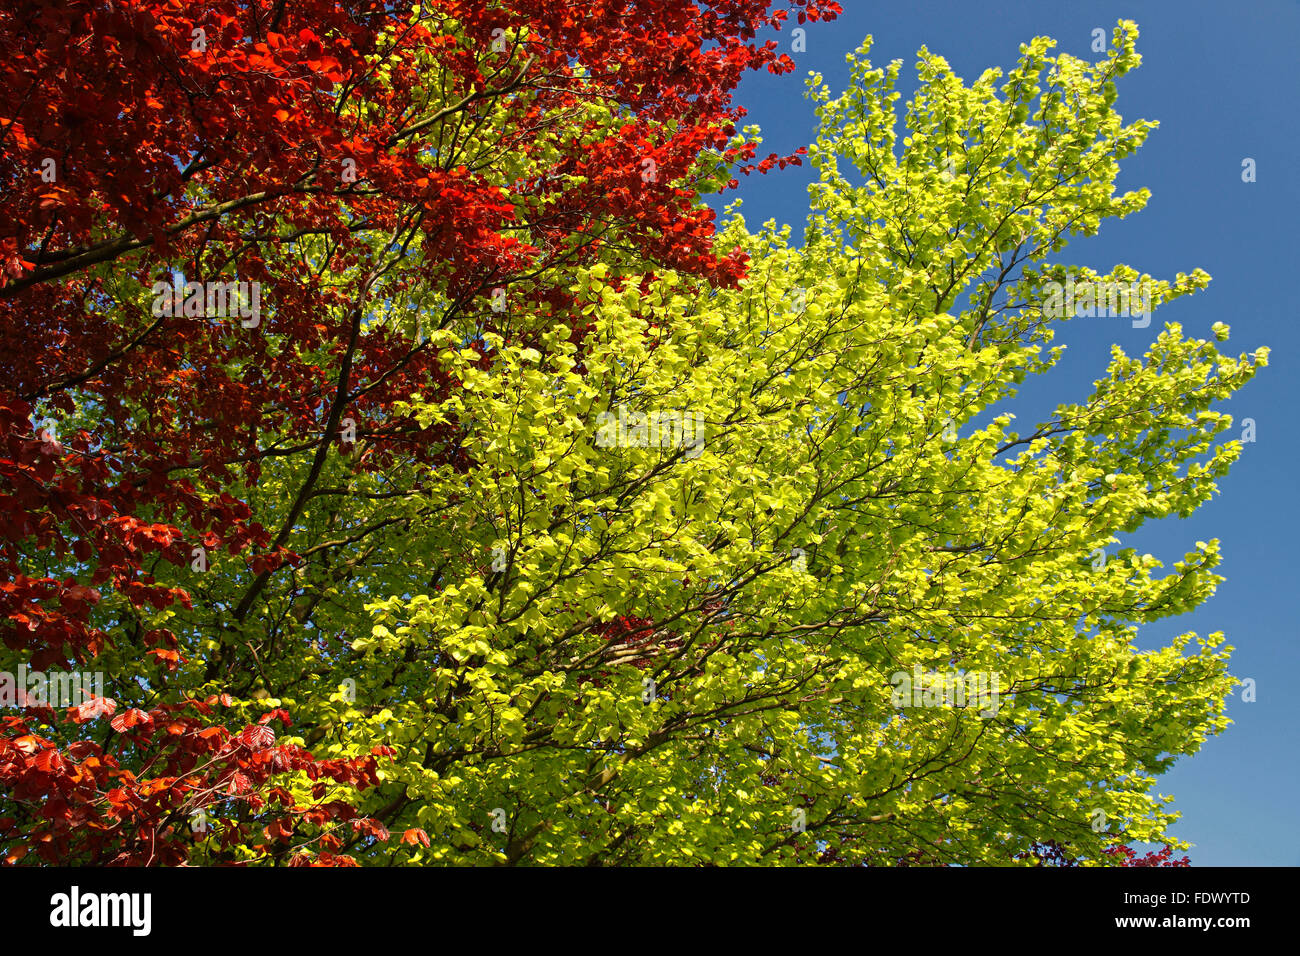 European beech / common beech (Fagus sylvatica) trees showing yellow and red foliage in autumn Stock Photo